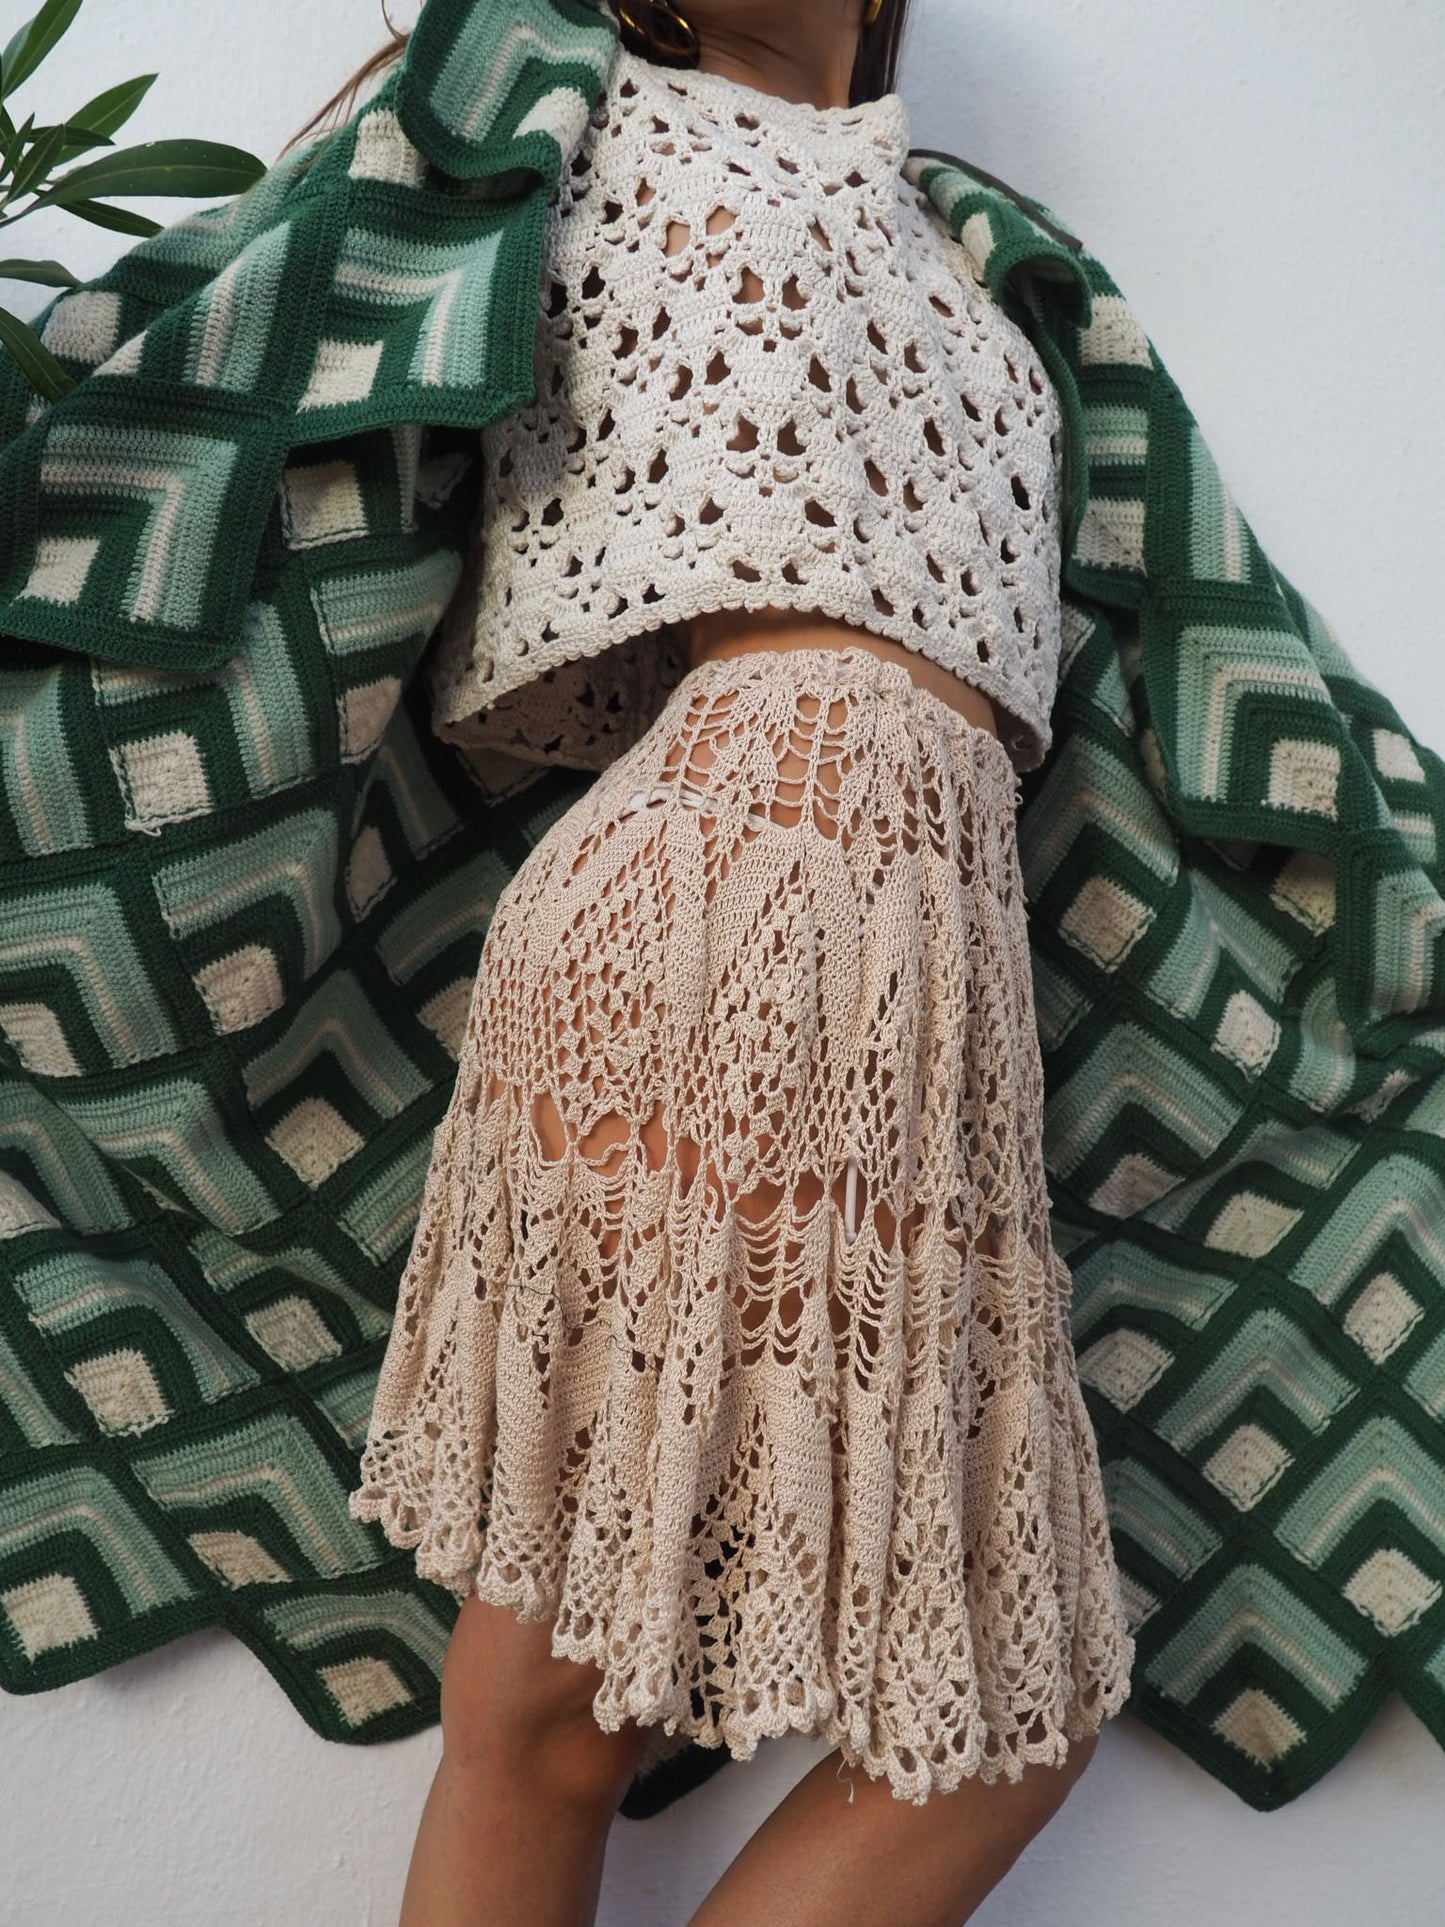 Vintage beige crochet lace skirt up-cycled by Vagabond Ibiza